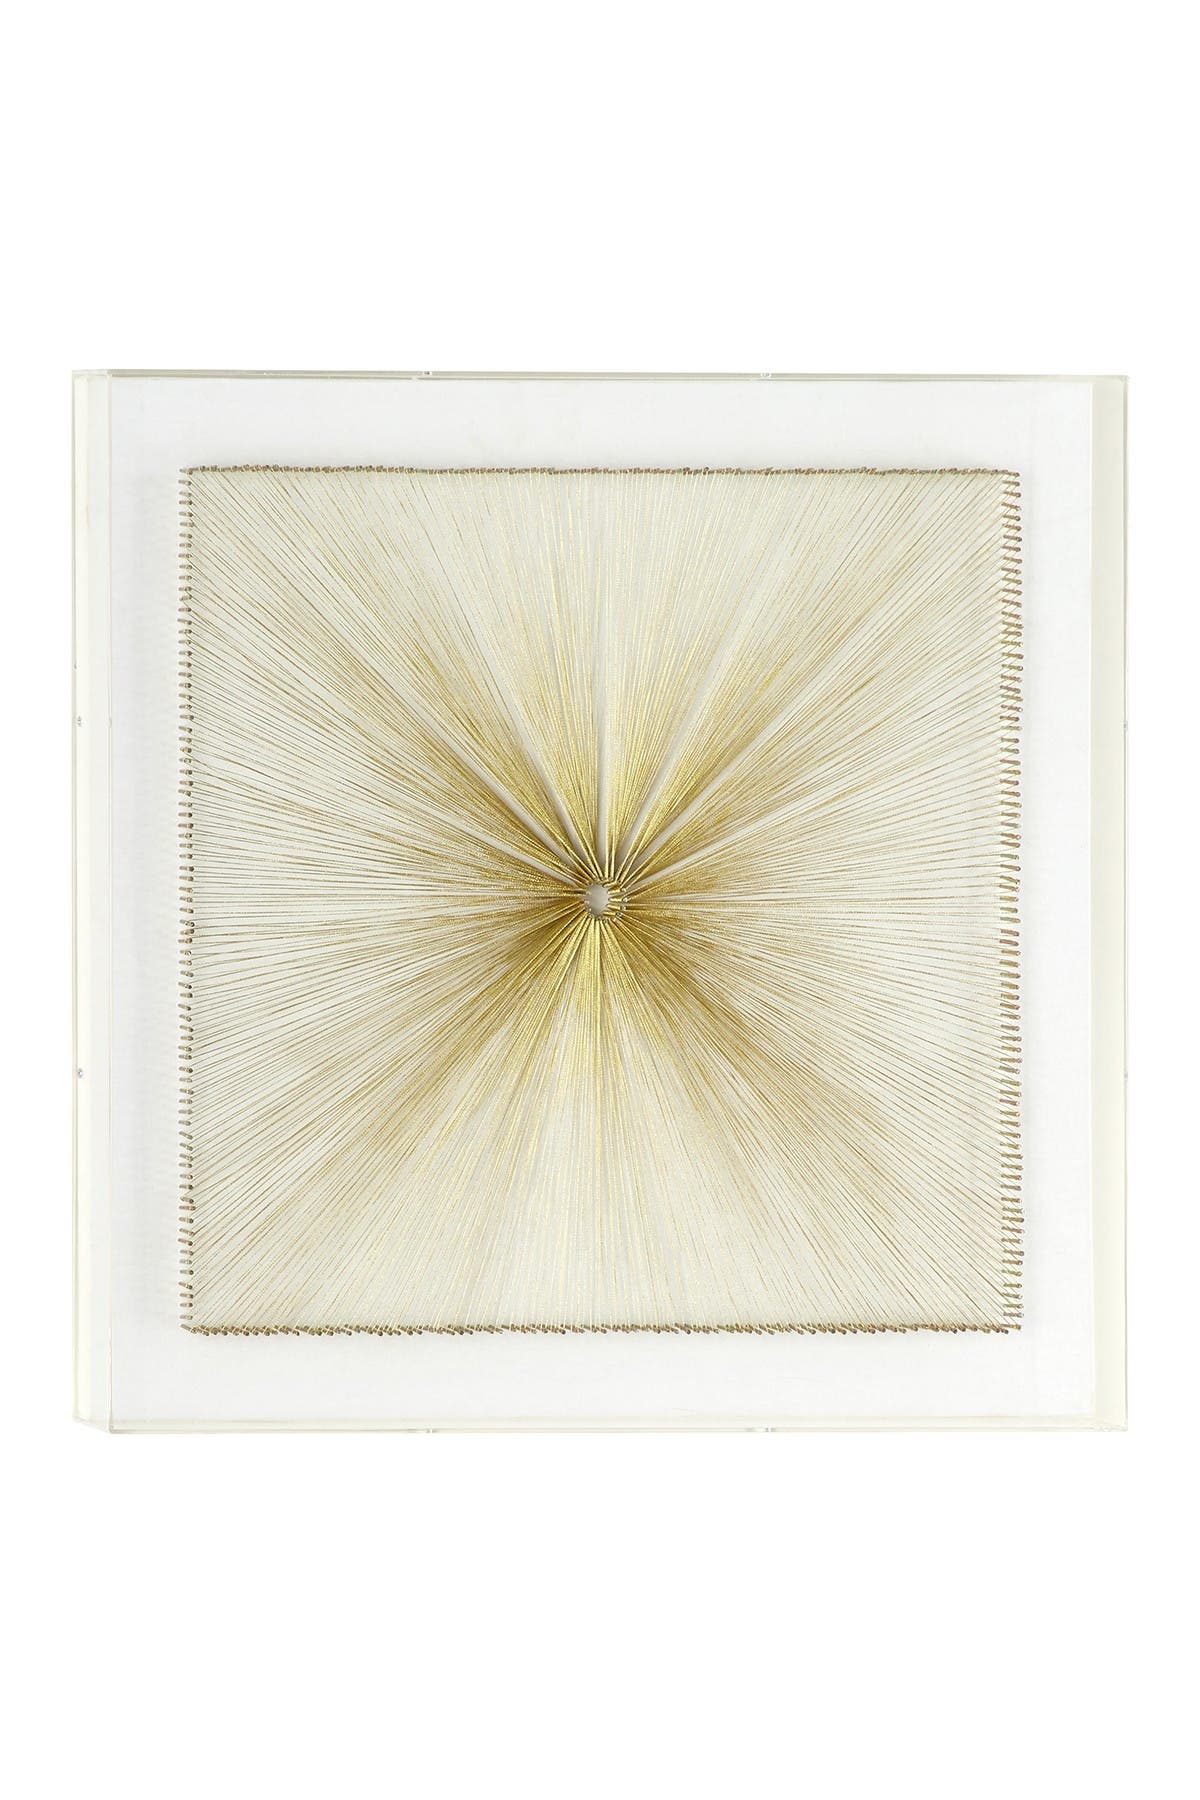 Venus Williams Collection Large White And Gold Thread Square Shadow Box Wall Decor In Multi